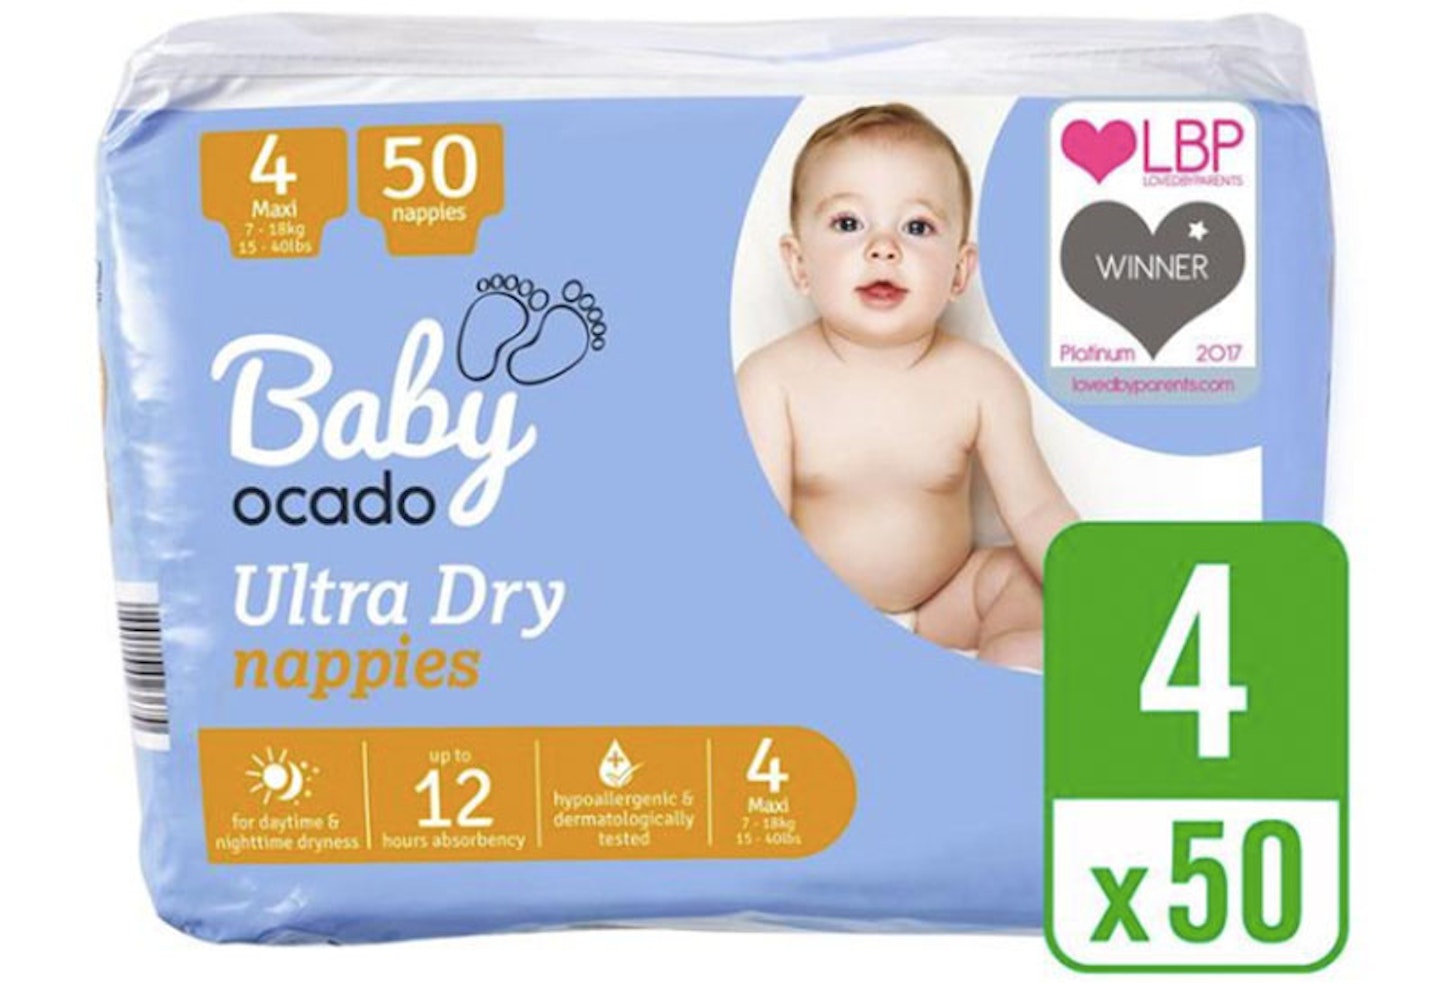 Baby Ocado Size 4 Ultra Dry Nappies (50 per pack) review